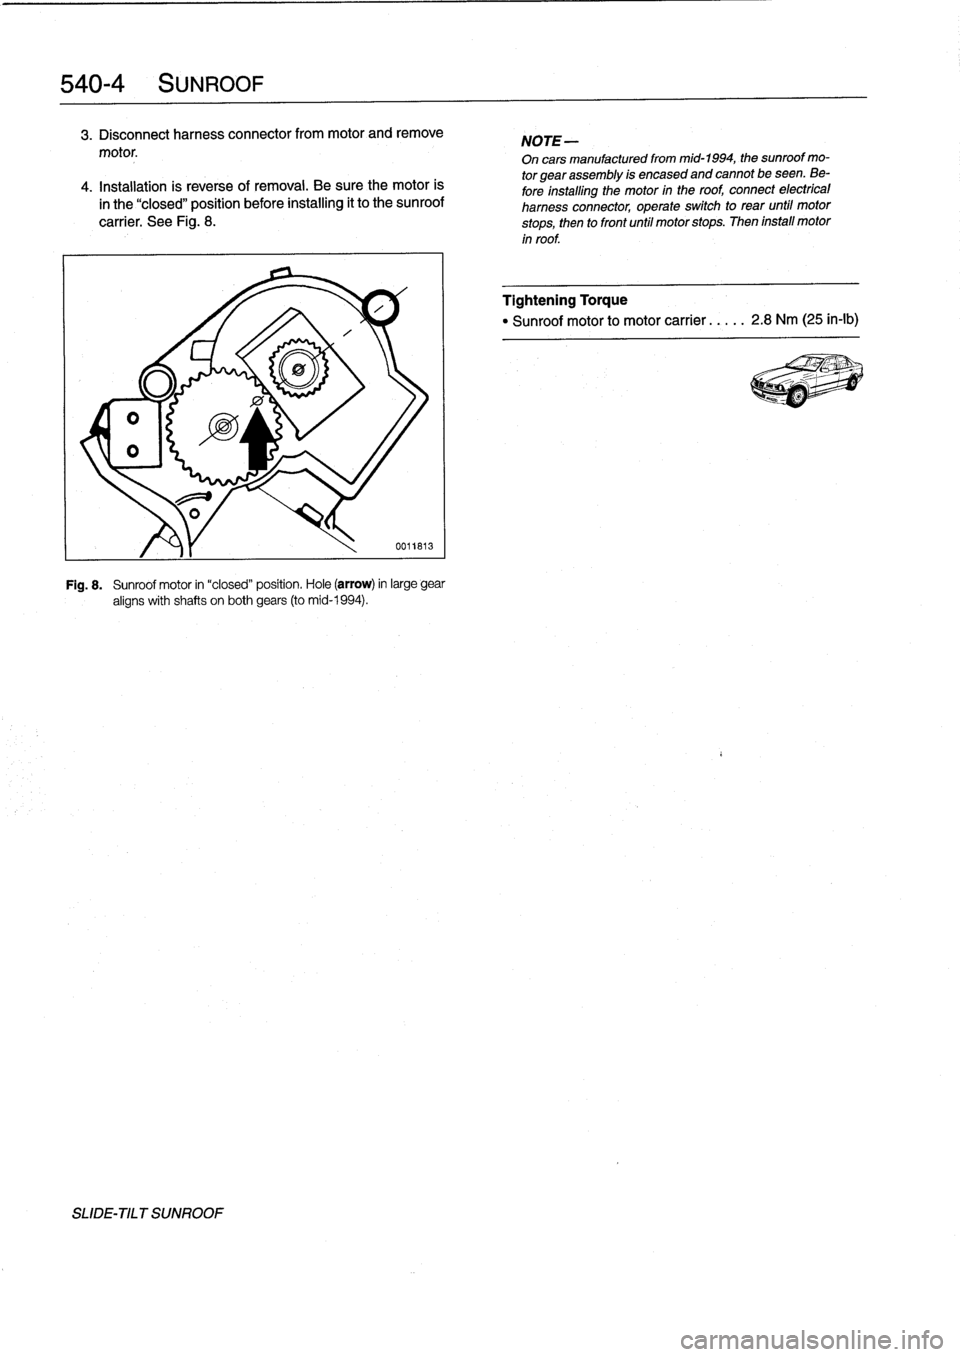 BMW M3 1992 E36 Workshop Manual 
540-
4
SUNROOF

3
.
Disconnect
harness
connector
from
motor
and
remove

motor
.

4
.
Installation
is
reverse
of
removal
.
Be
sure
the
motor
is
in
the
"closed"
position
before
installing
it
to
the
sun